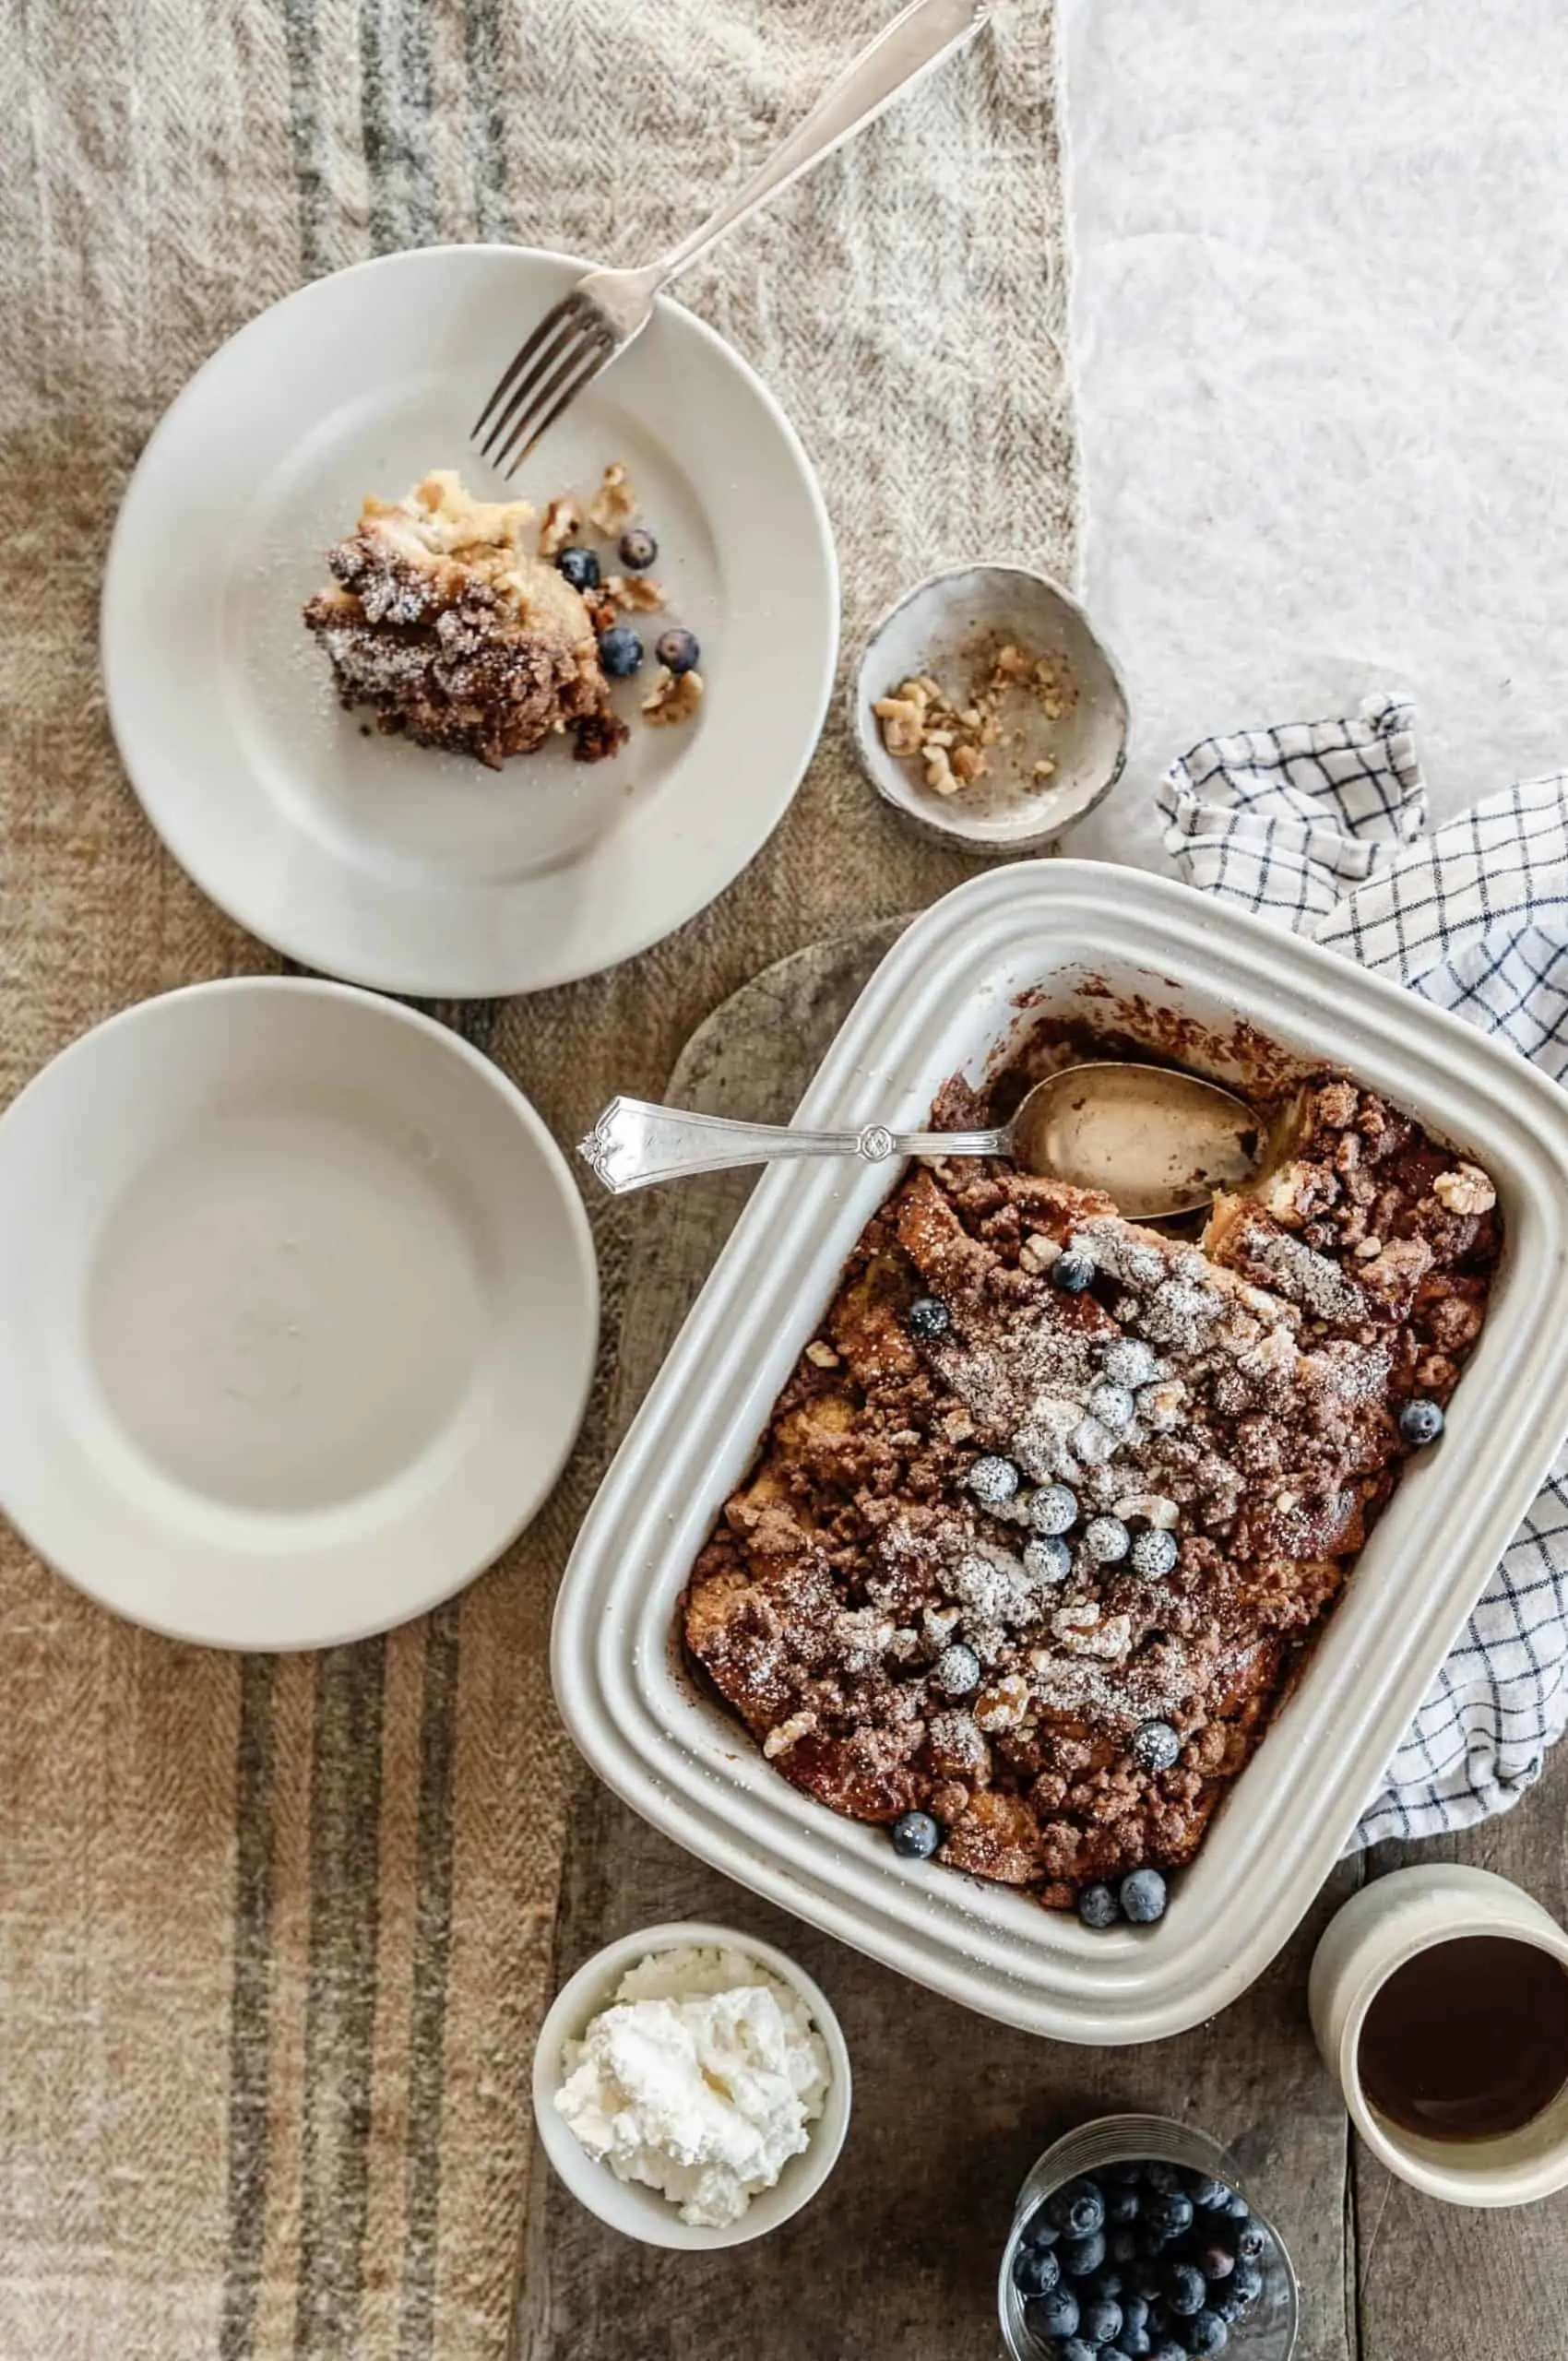 Baked french toast in a white baking dish served with whipped cream, blueberries, maple syrup and topped with powdered sugar.